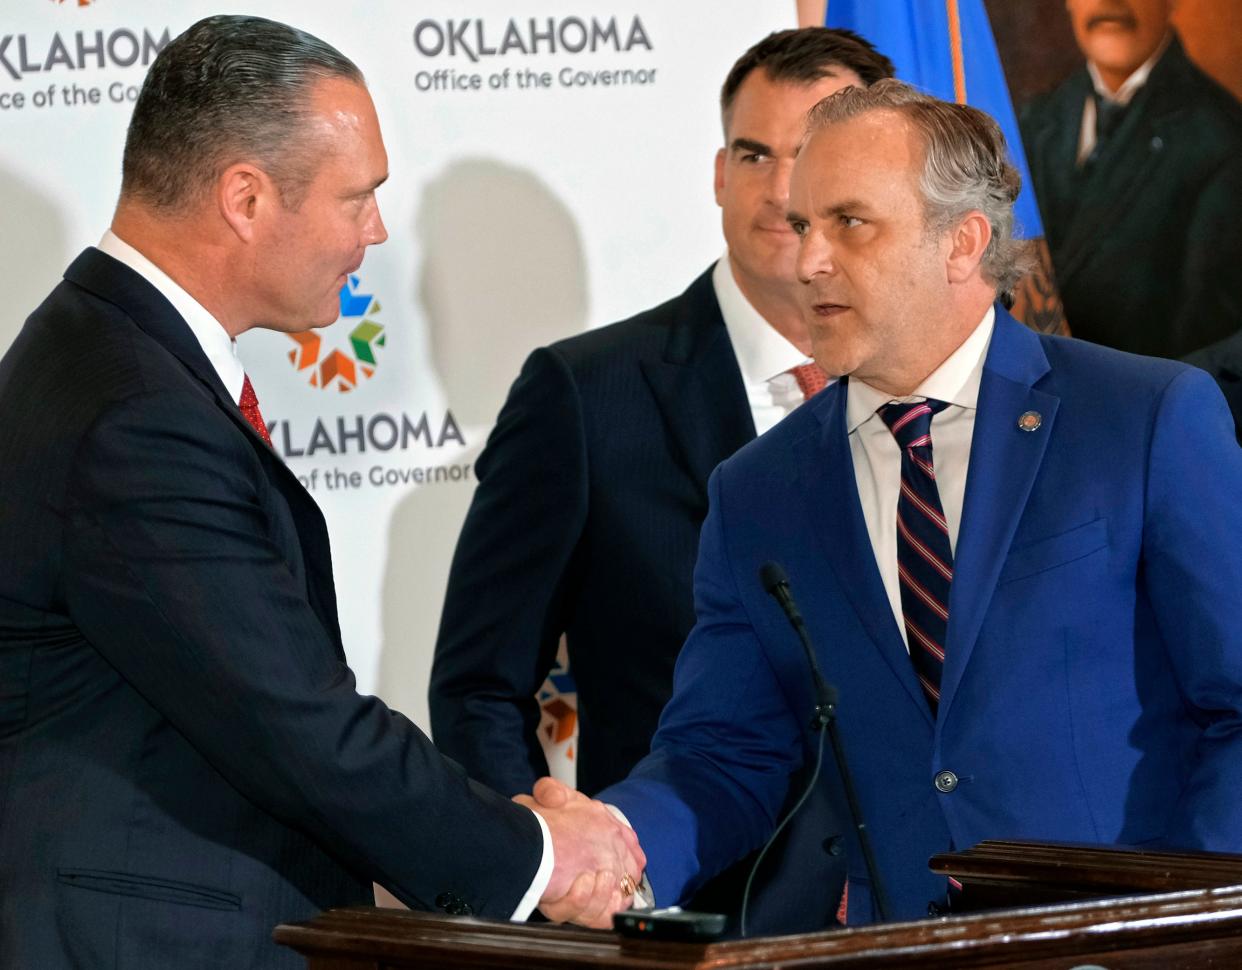 Speaker Charles McCall, left, welcomes President Pro Tem Greg Treat to the podium as Gov. Stitt looks on. Governor Kevin Stitt, President Pro Tem Greg Treat, and Speaker Charles McCall, along with other members from the House and Senate, will hold a joint press conference to announce their historic education reform agreement in the Blue Room of the Oklahoma State Capitol Monday, May 15, 2023.